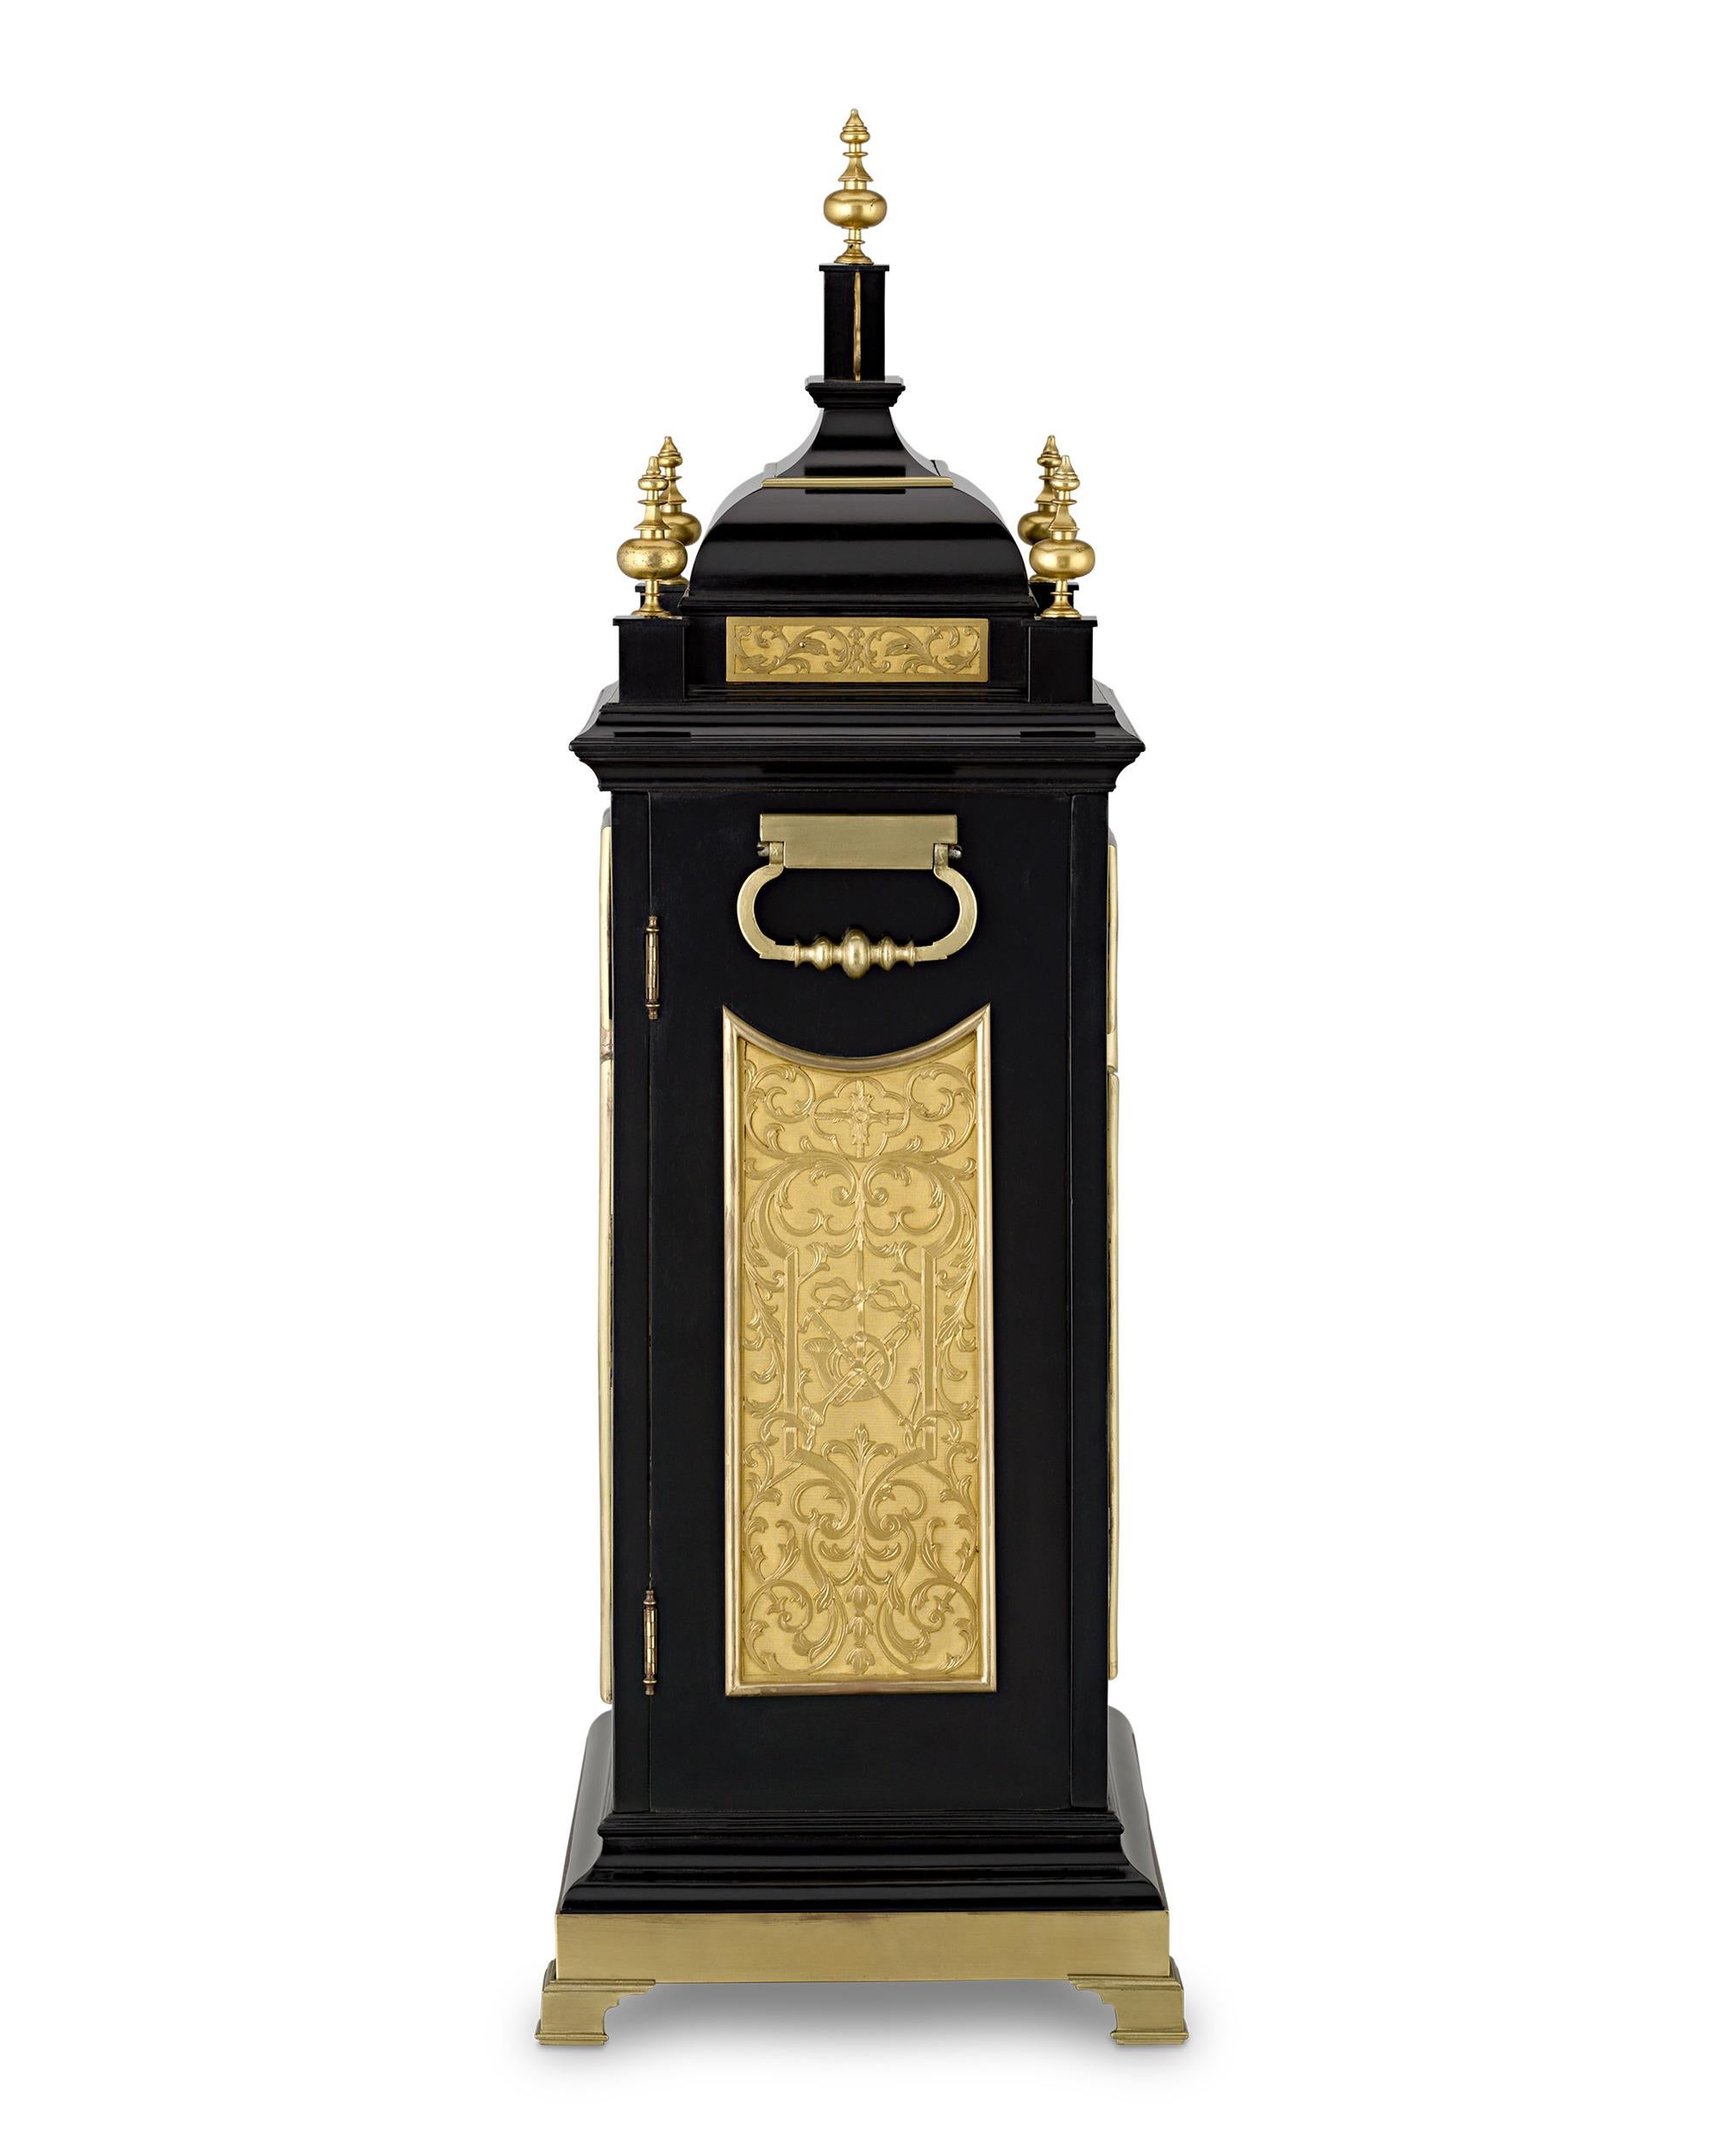 18th Century Dutch Musical Bracket Clock In Excellent Condition For Sale In New Orleans, LA